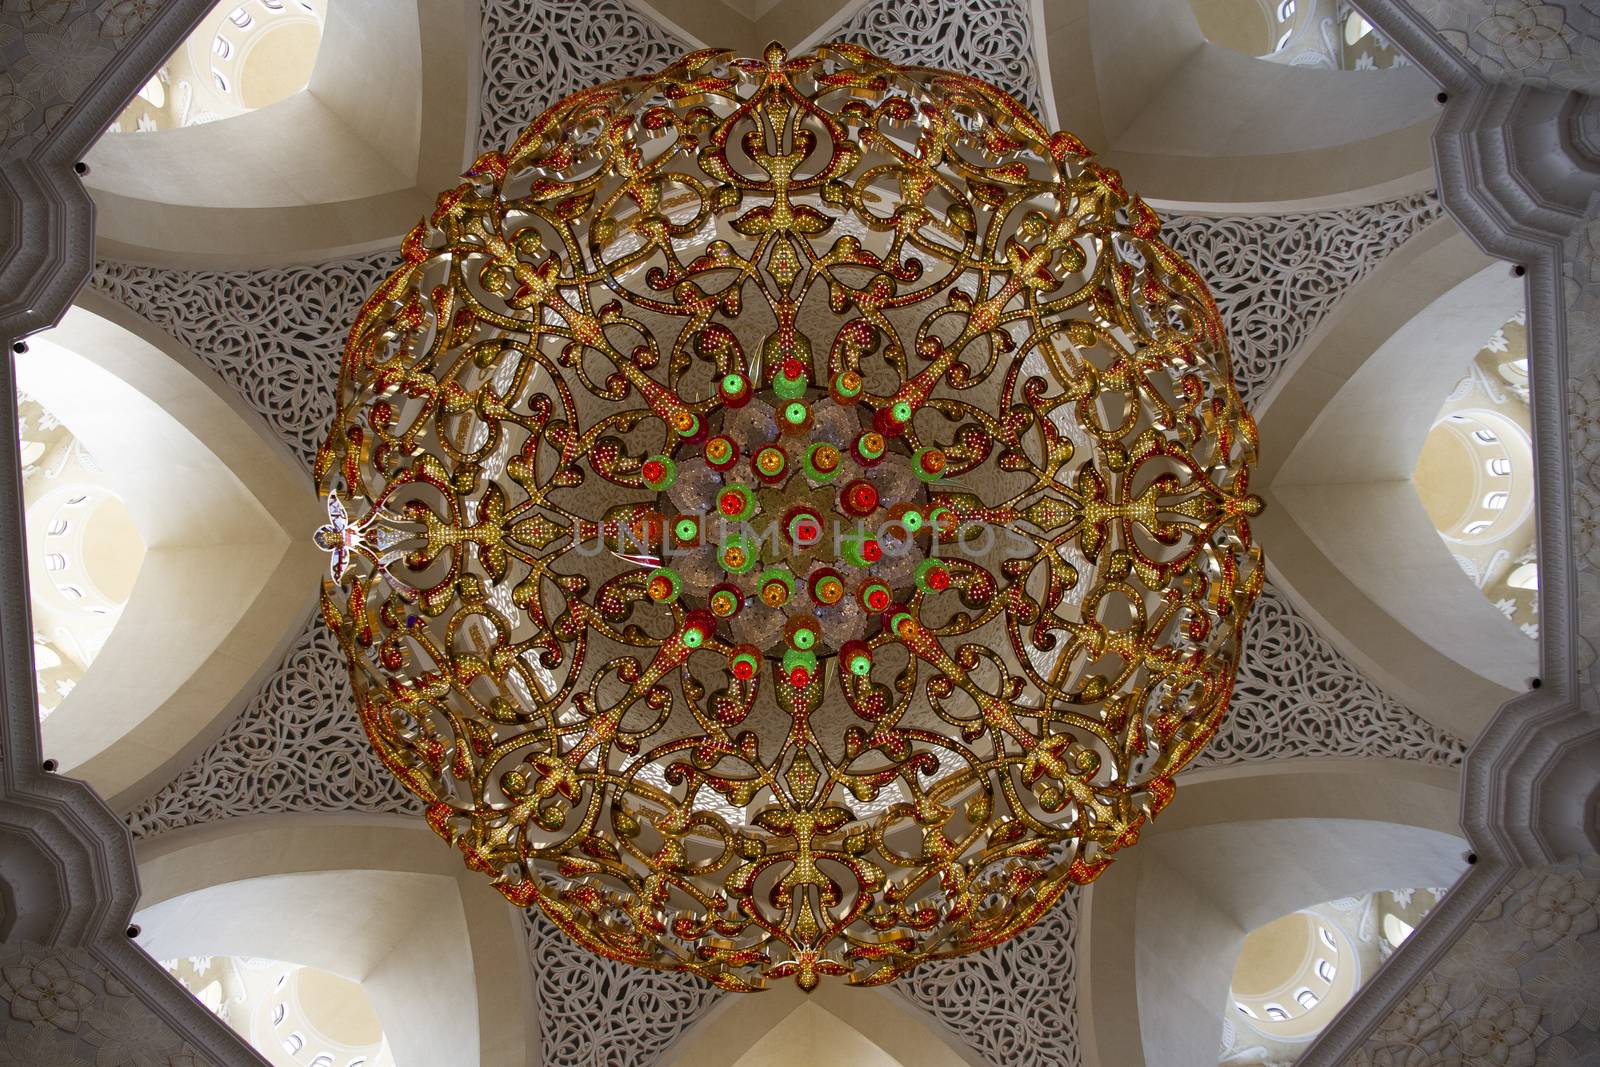 Sheikh Zayed Grand Mosque, Abu Dhabi close up interior by Tjeerdkruse